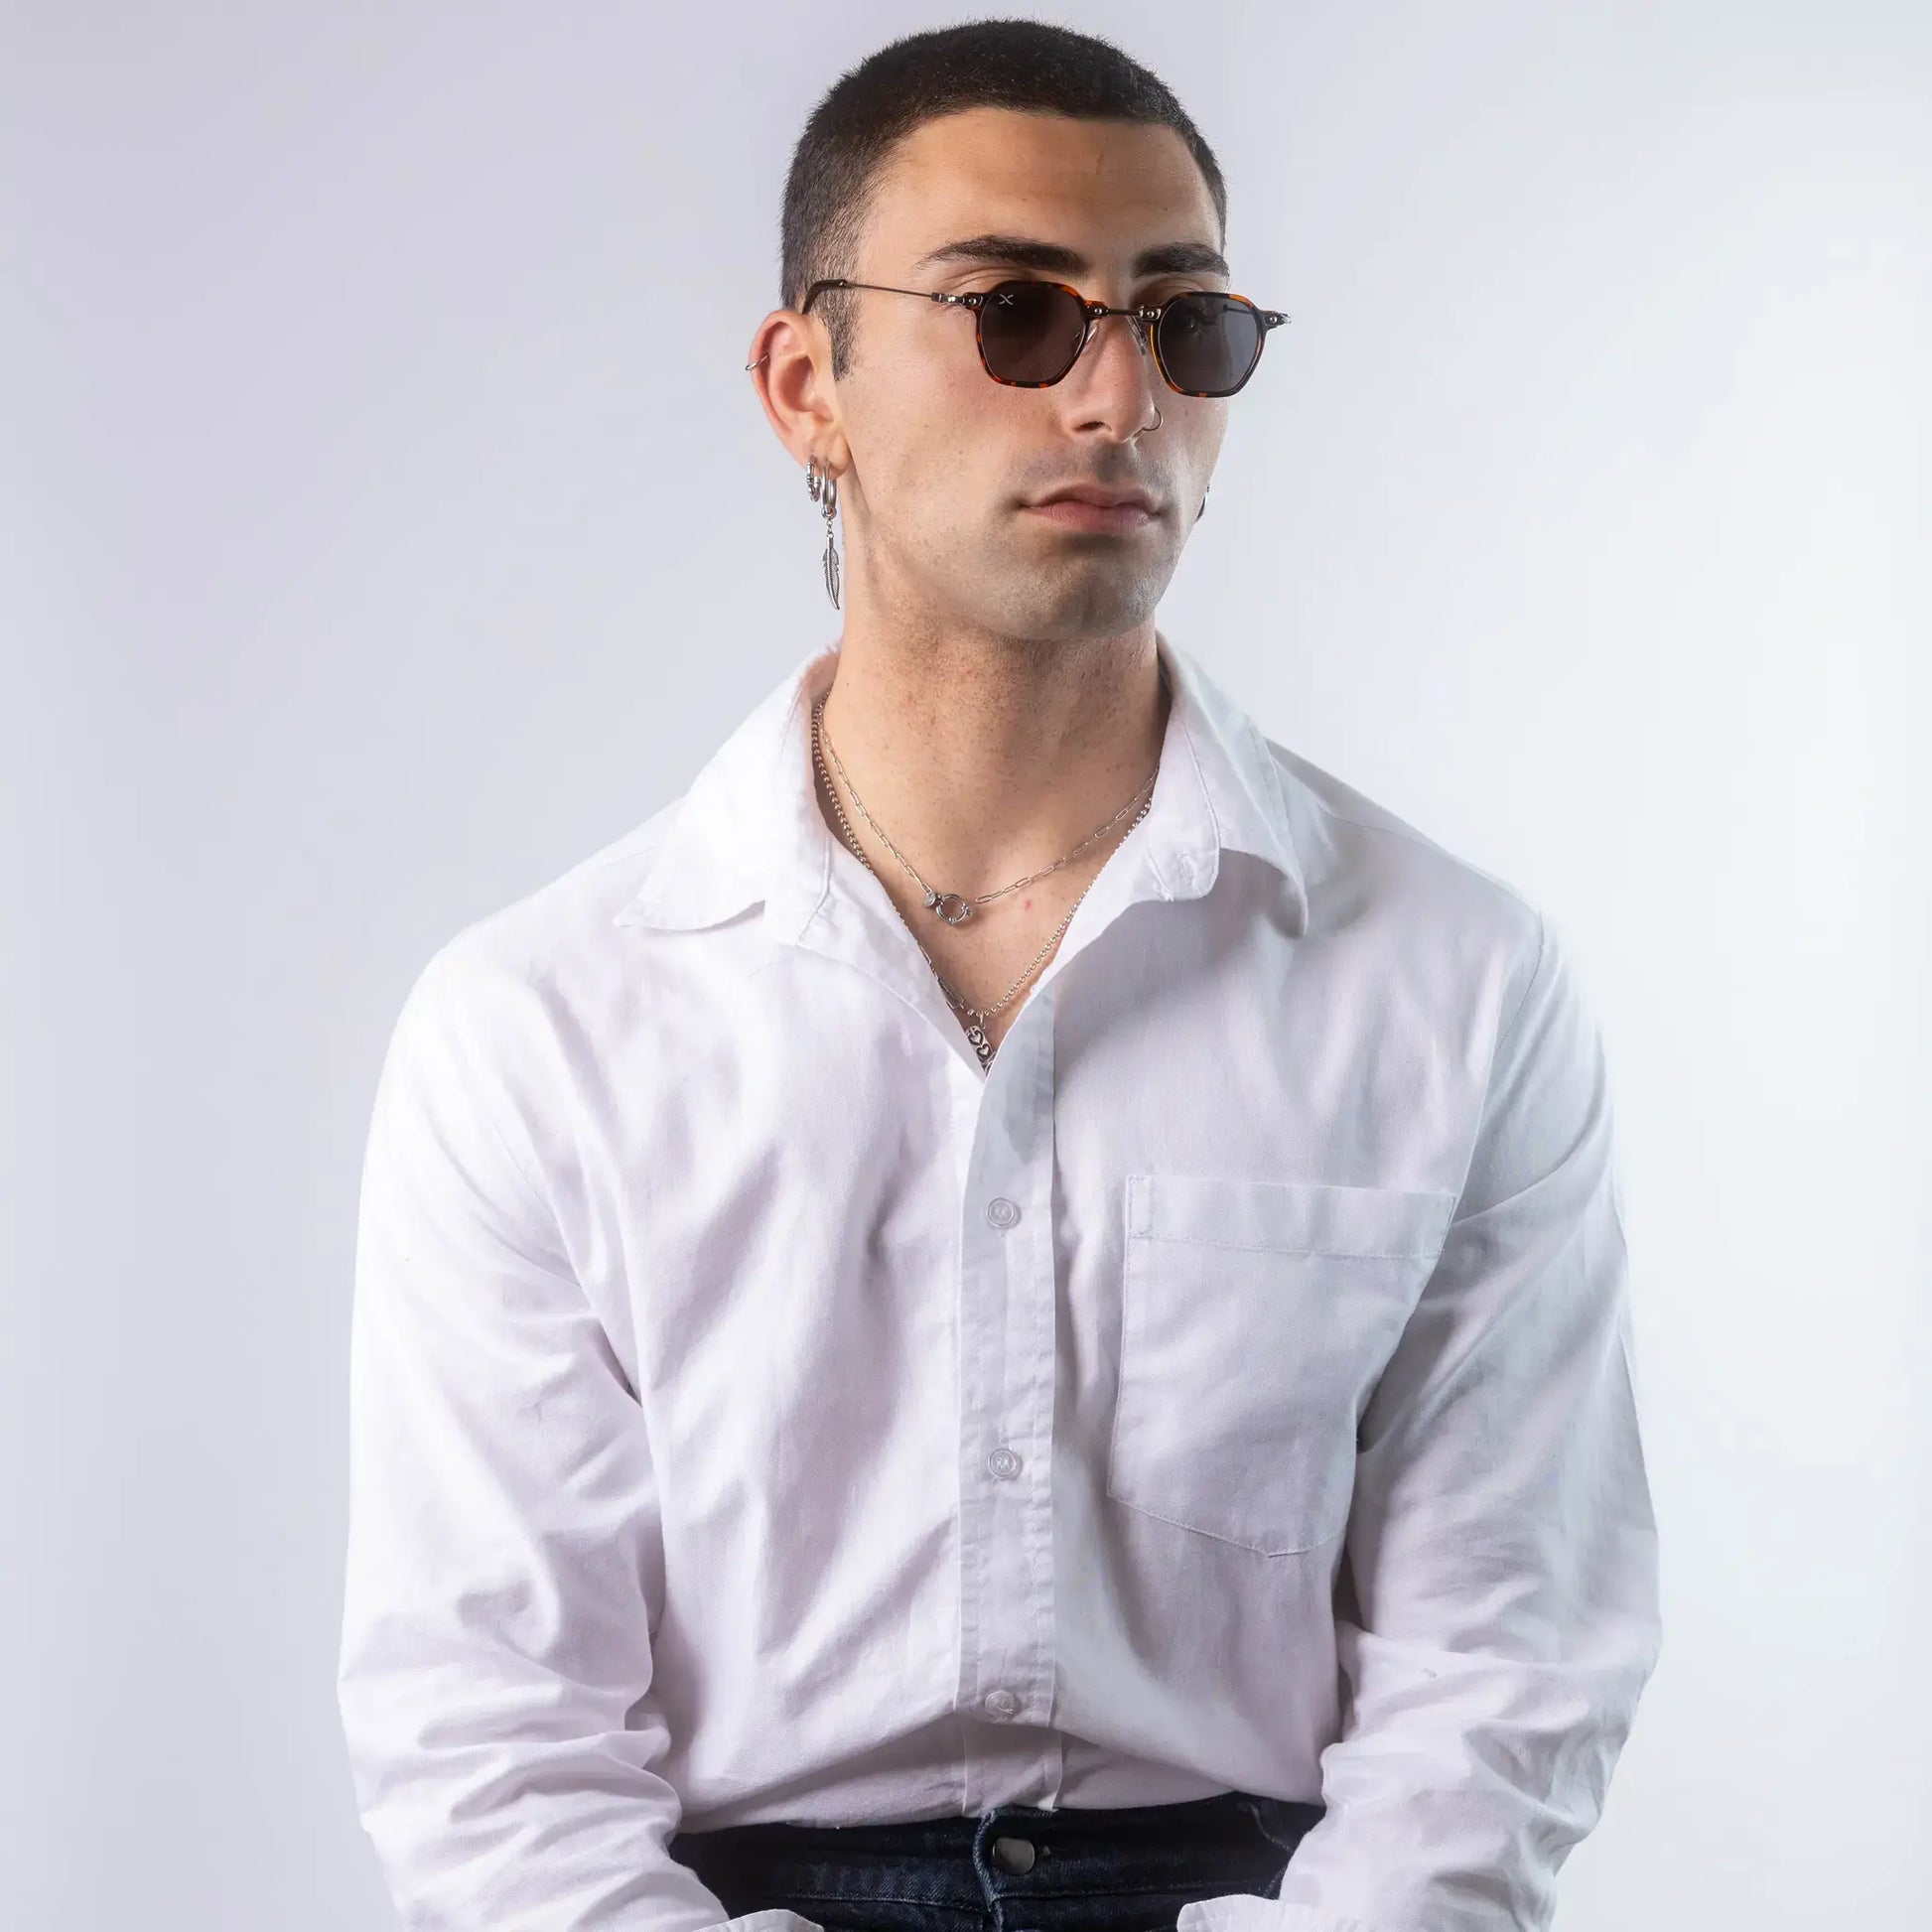 A male model wearing Exposure Sunglasses polarized sunglasses with brown frames and black lenses, posing against a white background.